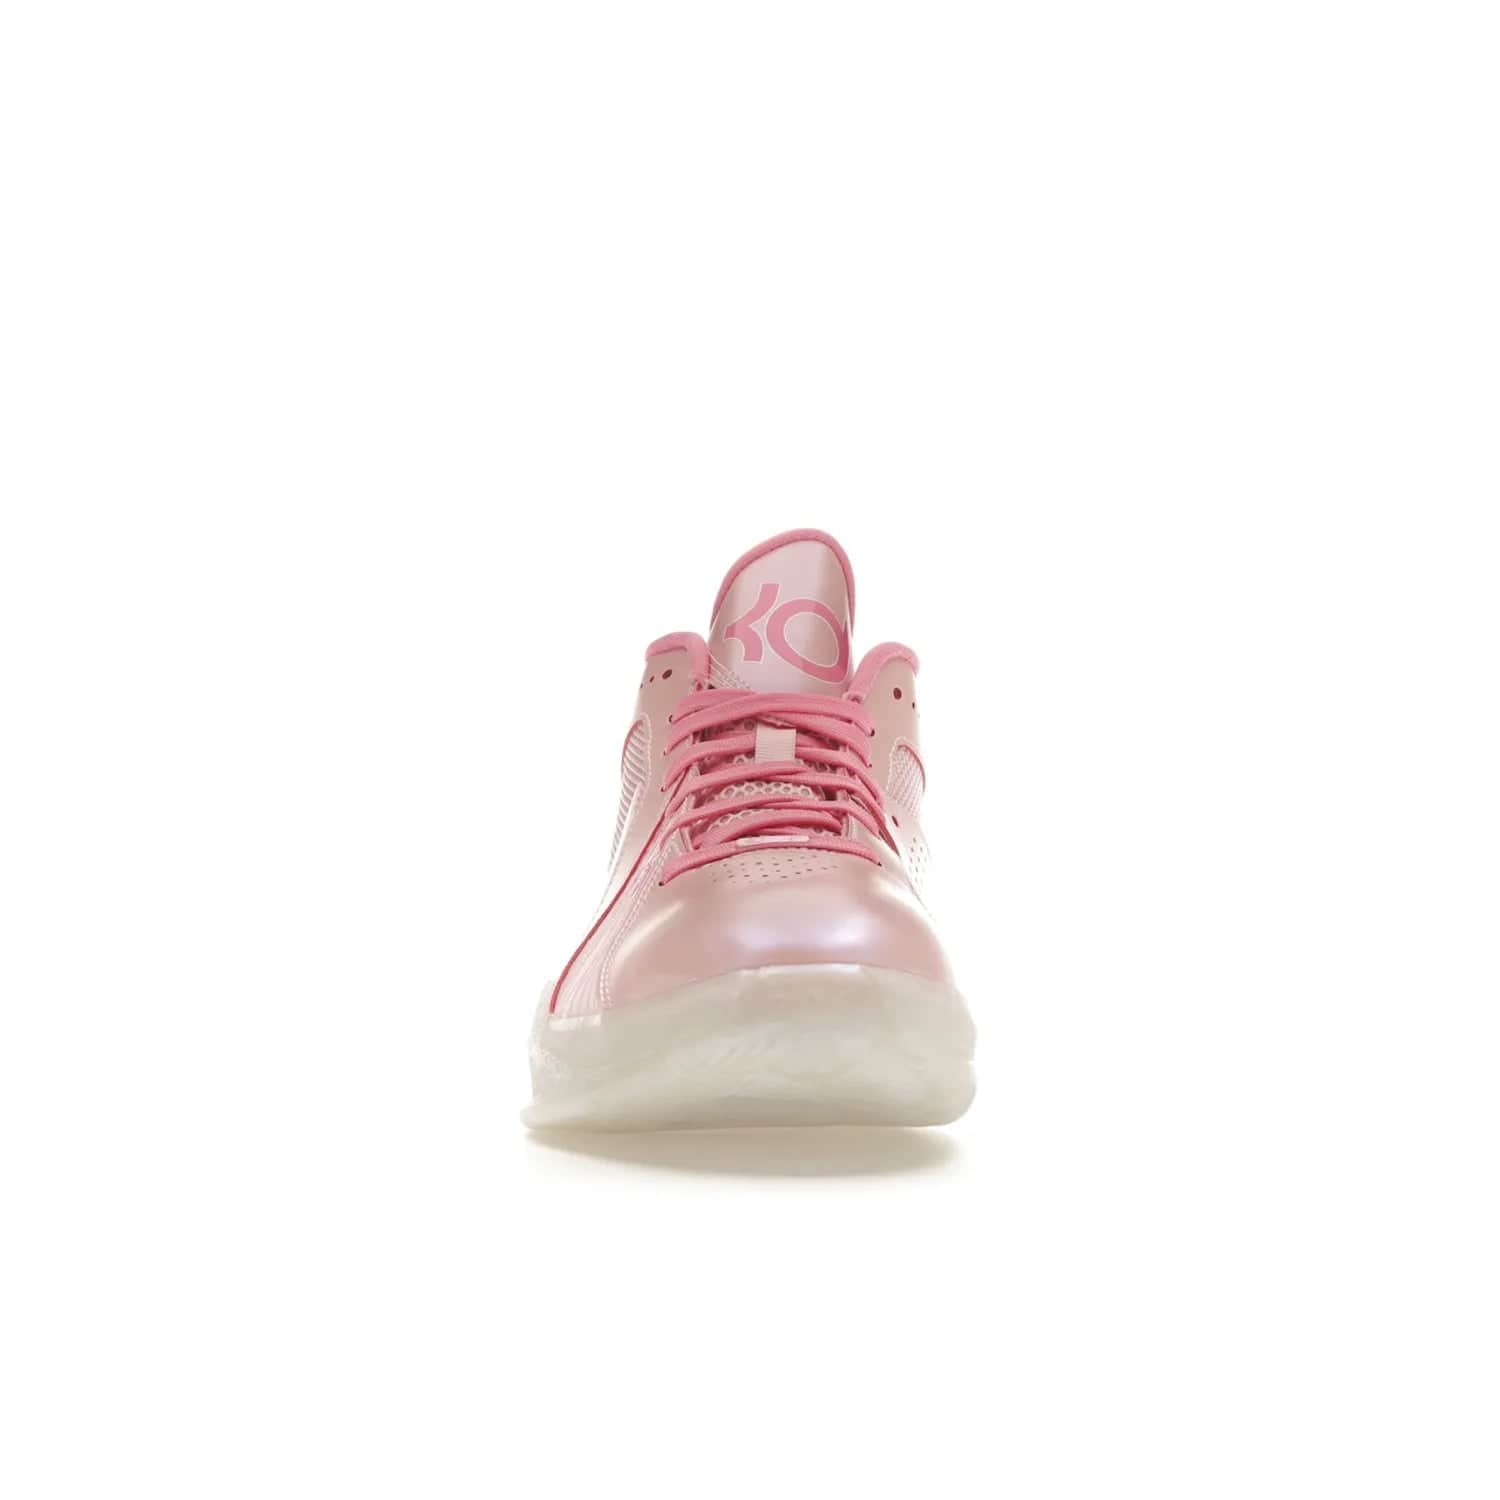 Nike KD 3 Aunt Pearl - Image 10 - Only at www.BallersClubKickz.com - Introducing the Nike KD 3 Aunt Pearl. Featuring a bold Medium Soft Pink, White, & Lotus Pink colorway. Get ready to stand out this October 15th.